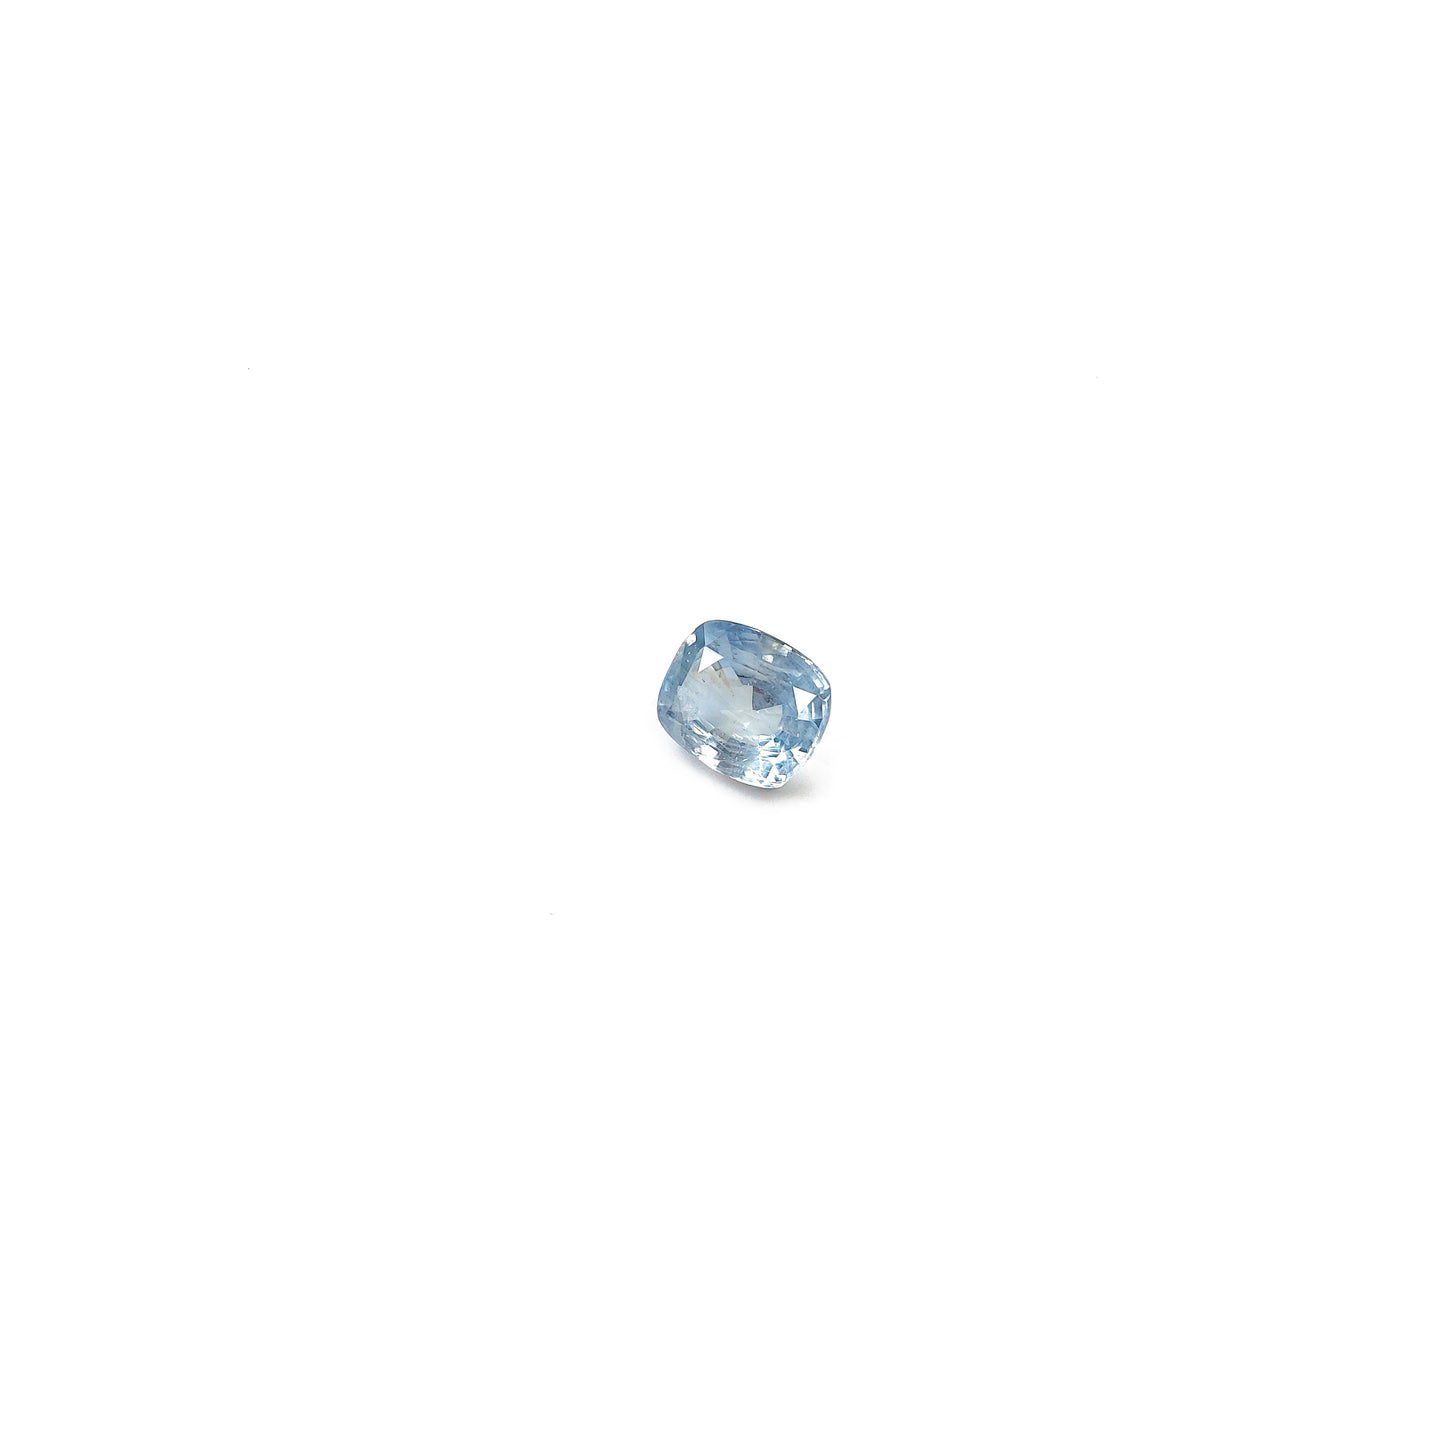 100% Natural Unheated Blue sapphire | 6.96cts